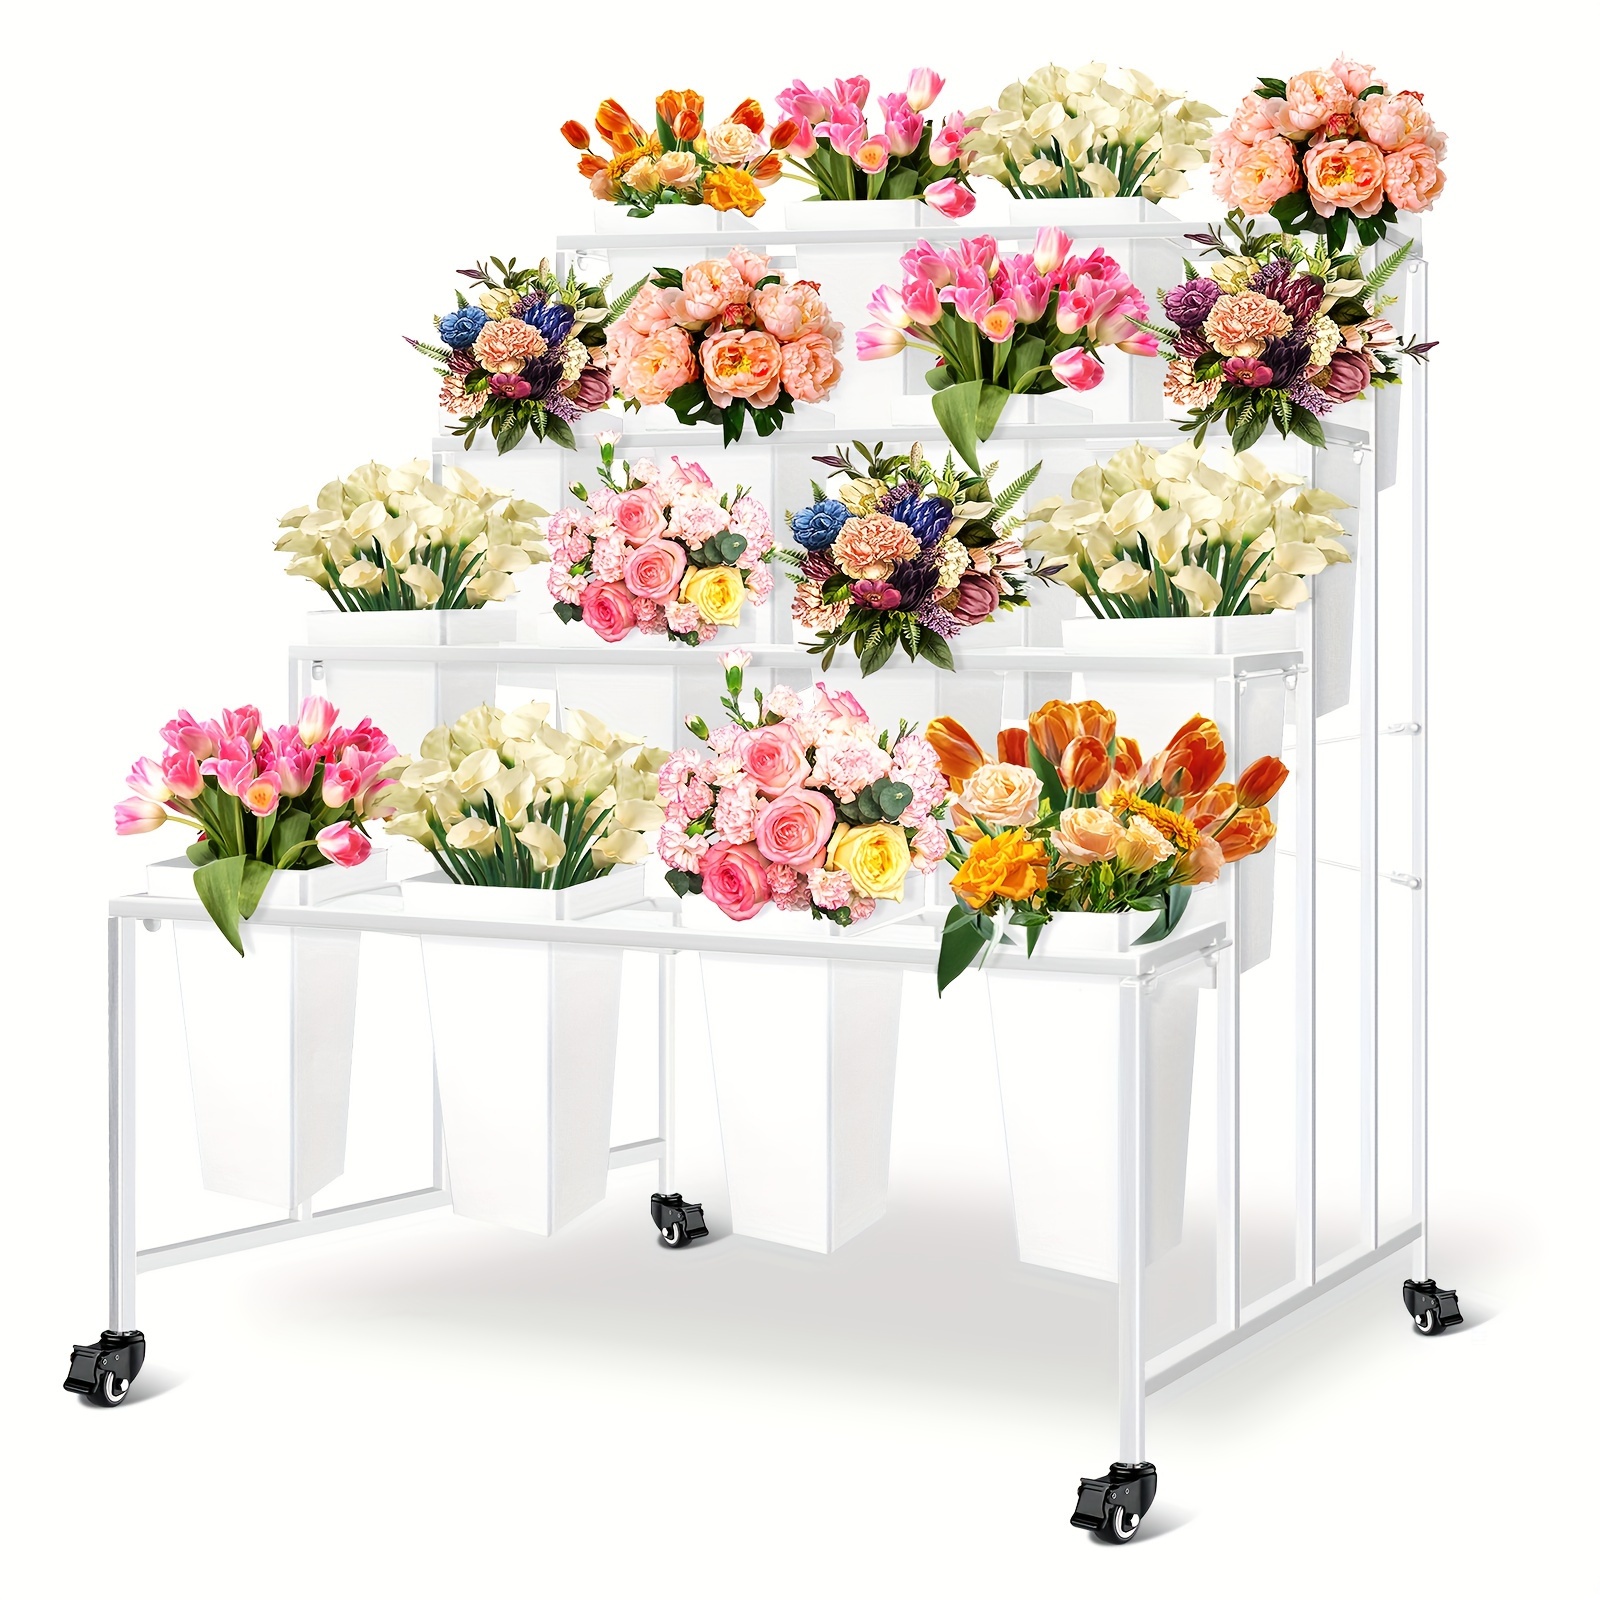 

Flower Display Stand With Buckets, 4 Layers 16pcs Buckets Metal Flower Cart Display Stand With Wheels, Heavy Duty Moving Plant Cart Shelf, For Florist, Garden, Patio